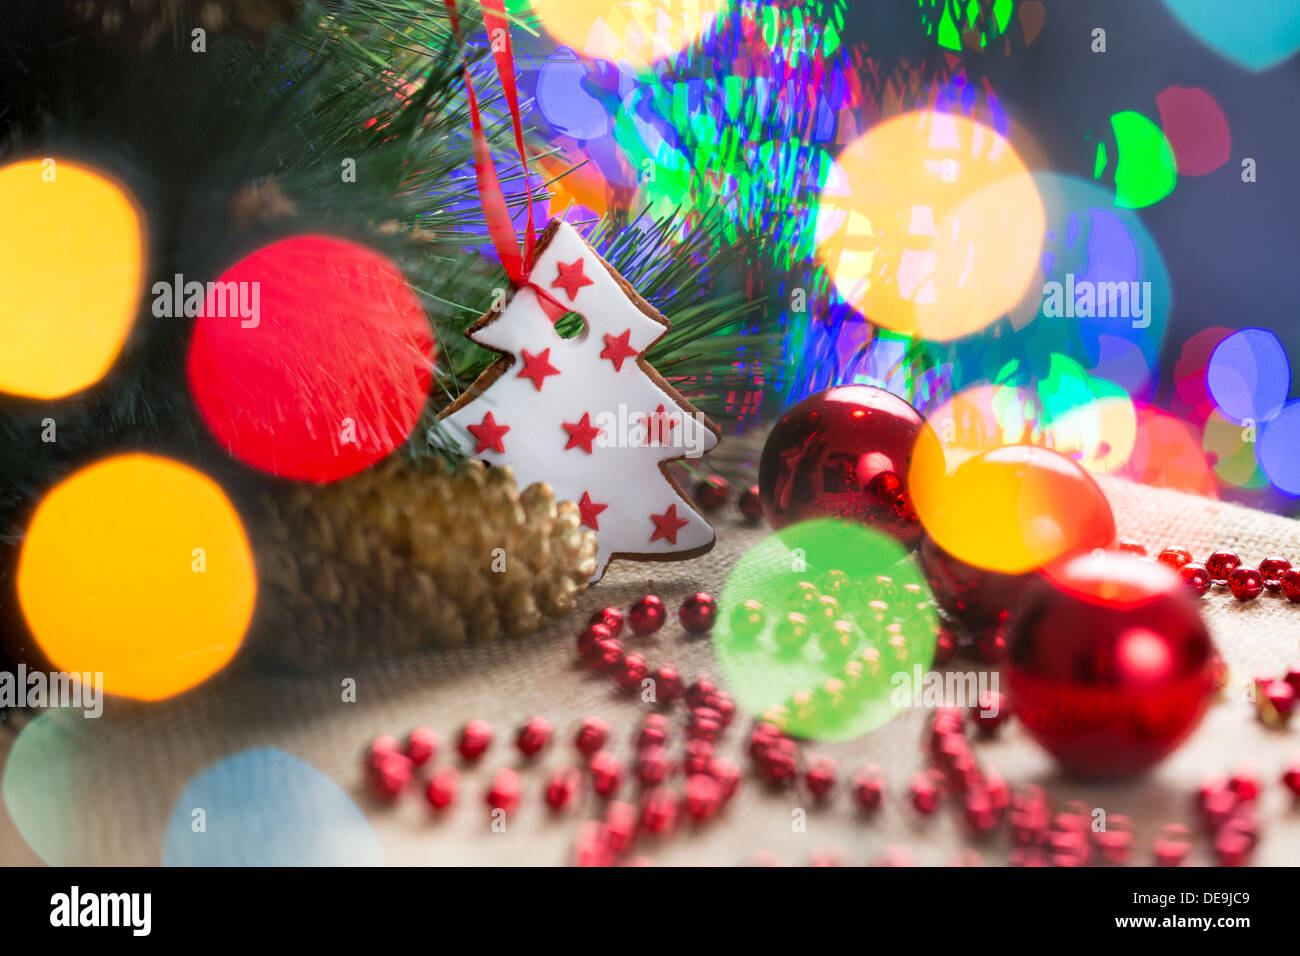 Christmas tree with bauble and cake over bright festive background Stock Photo